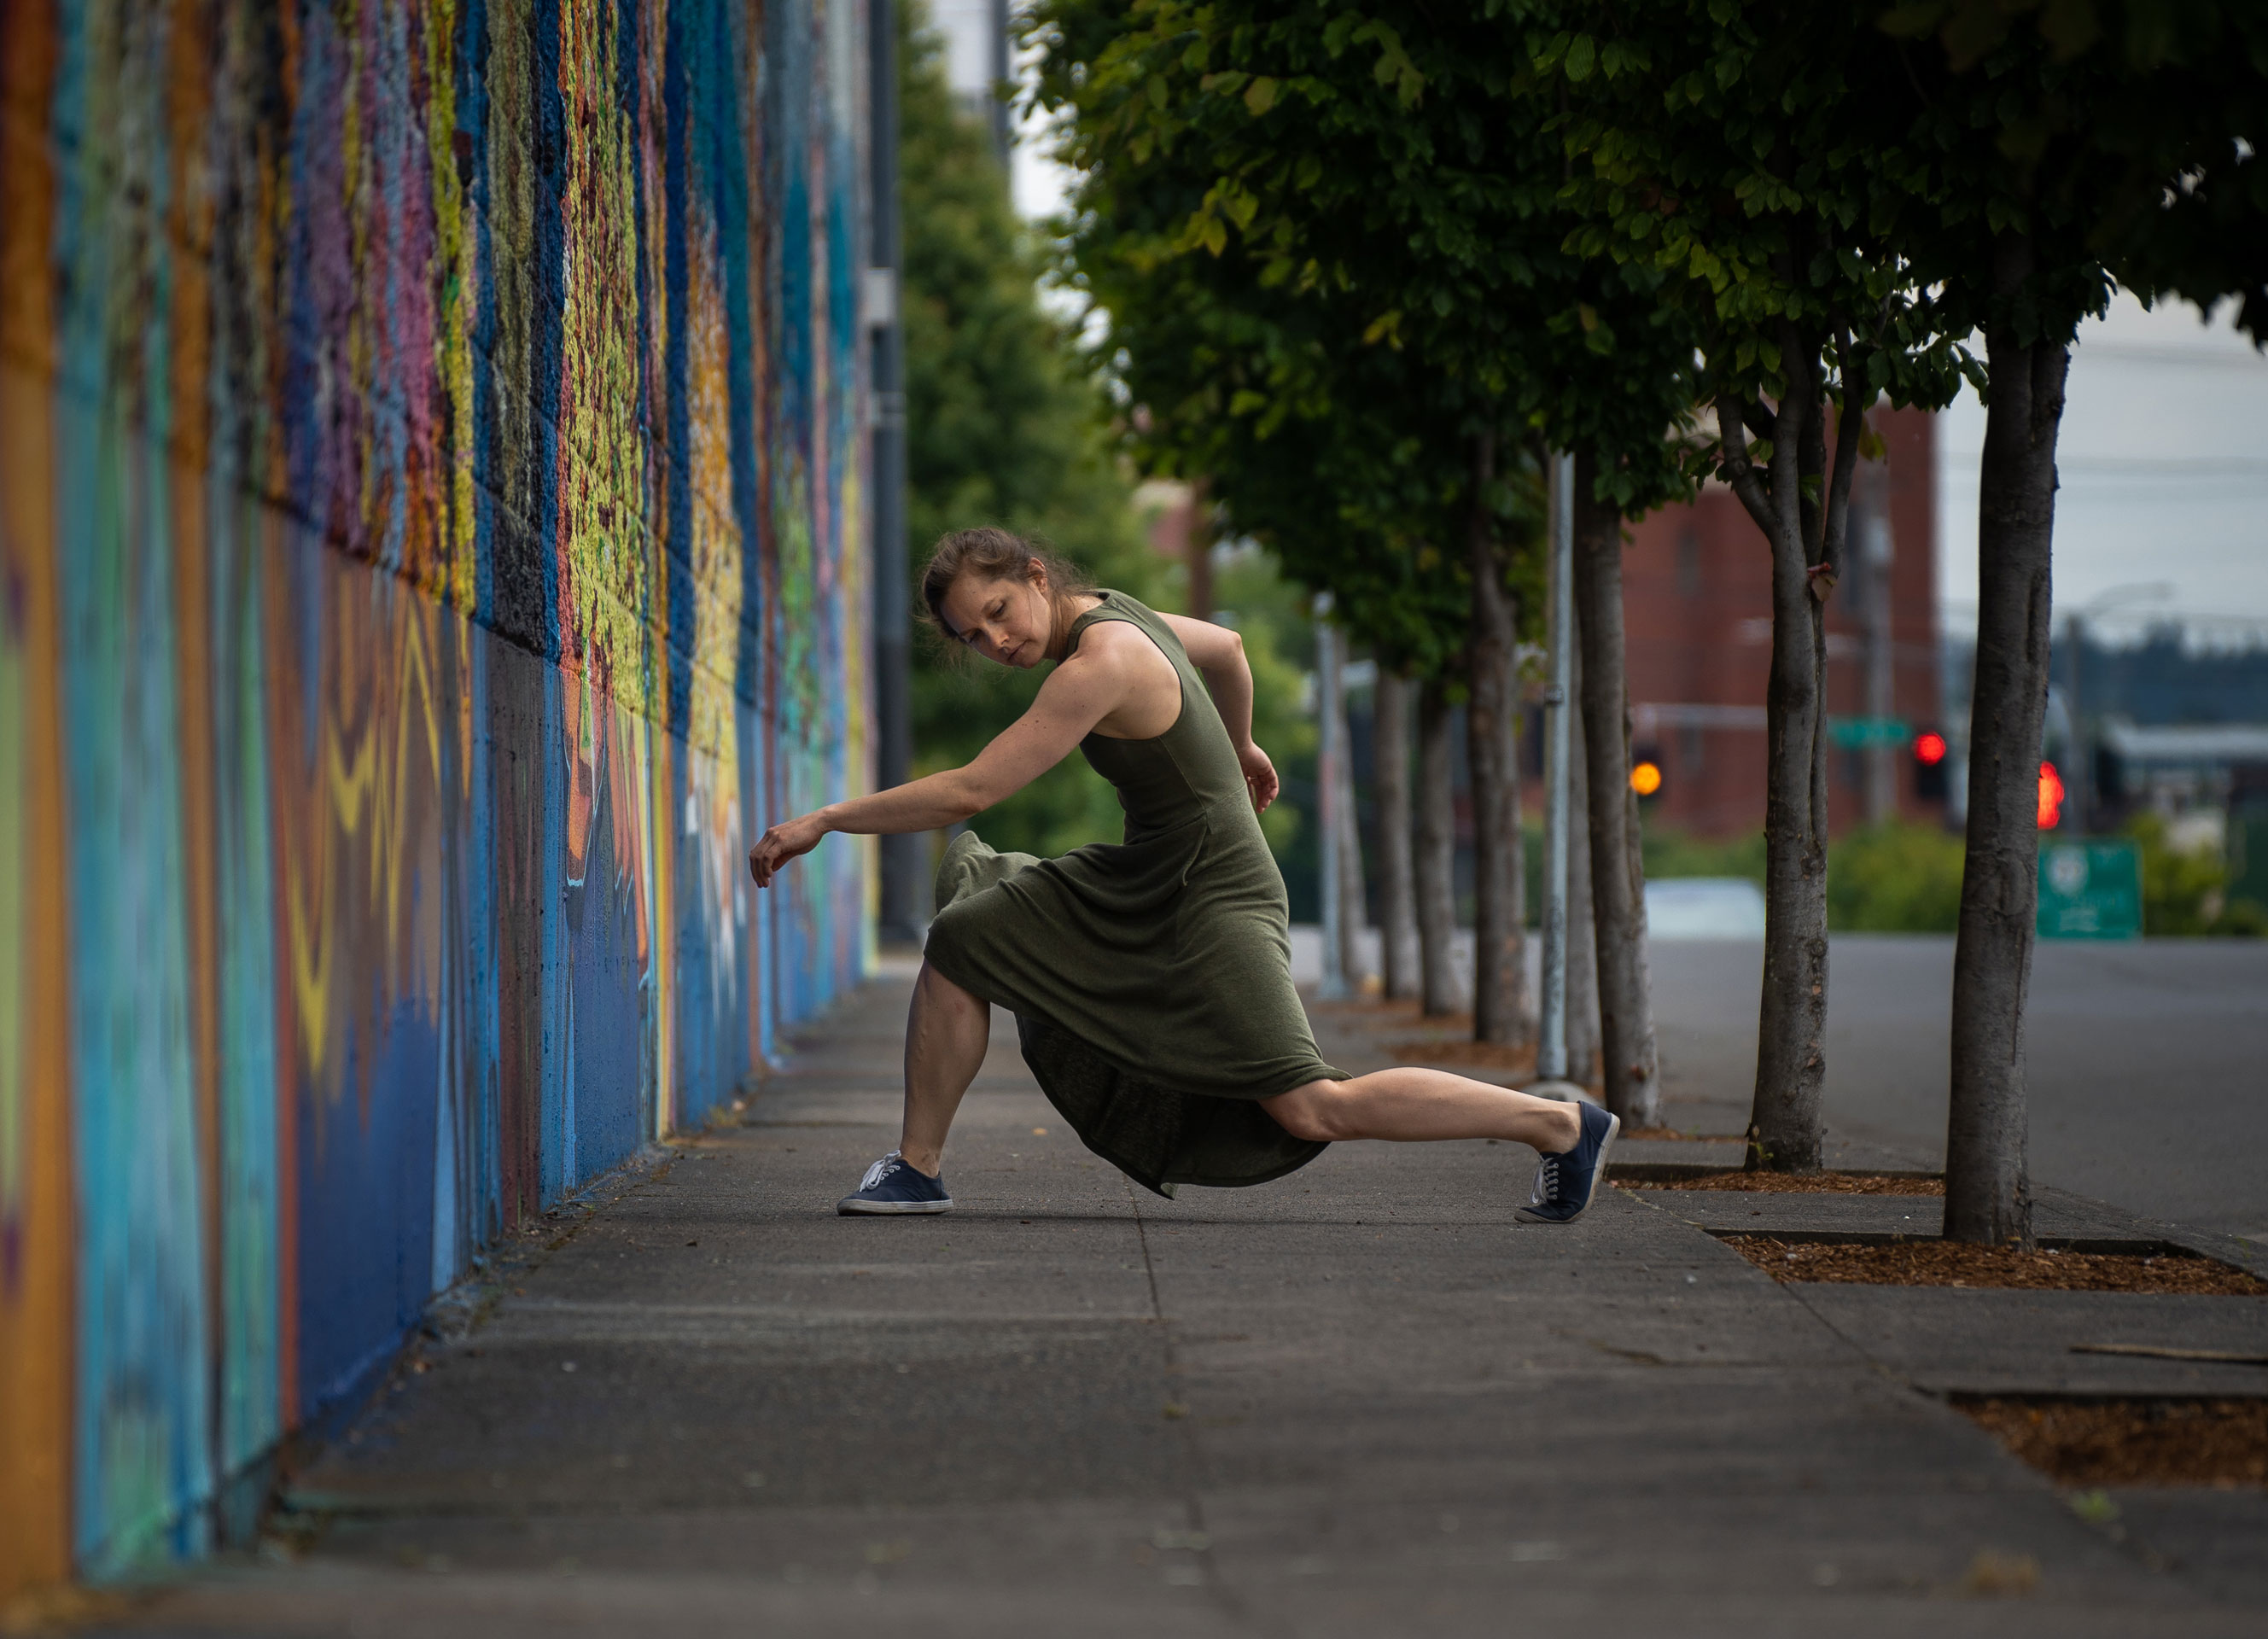 push/FOLD's managing director Holly Shaw dancing next to a large wall featuring graffiti in Portland, OR | Photography: Samuel Hobbs